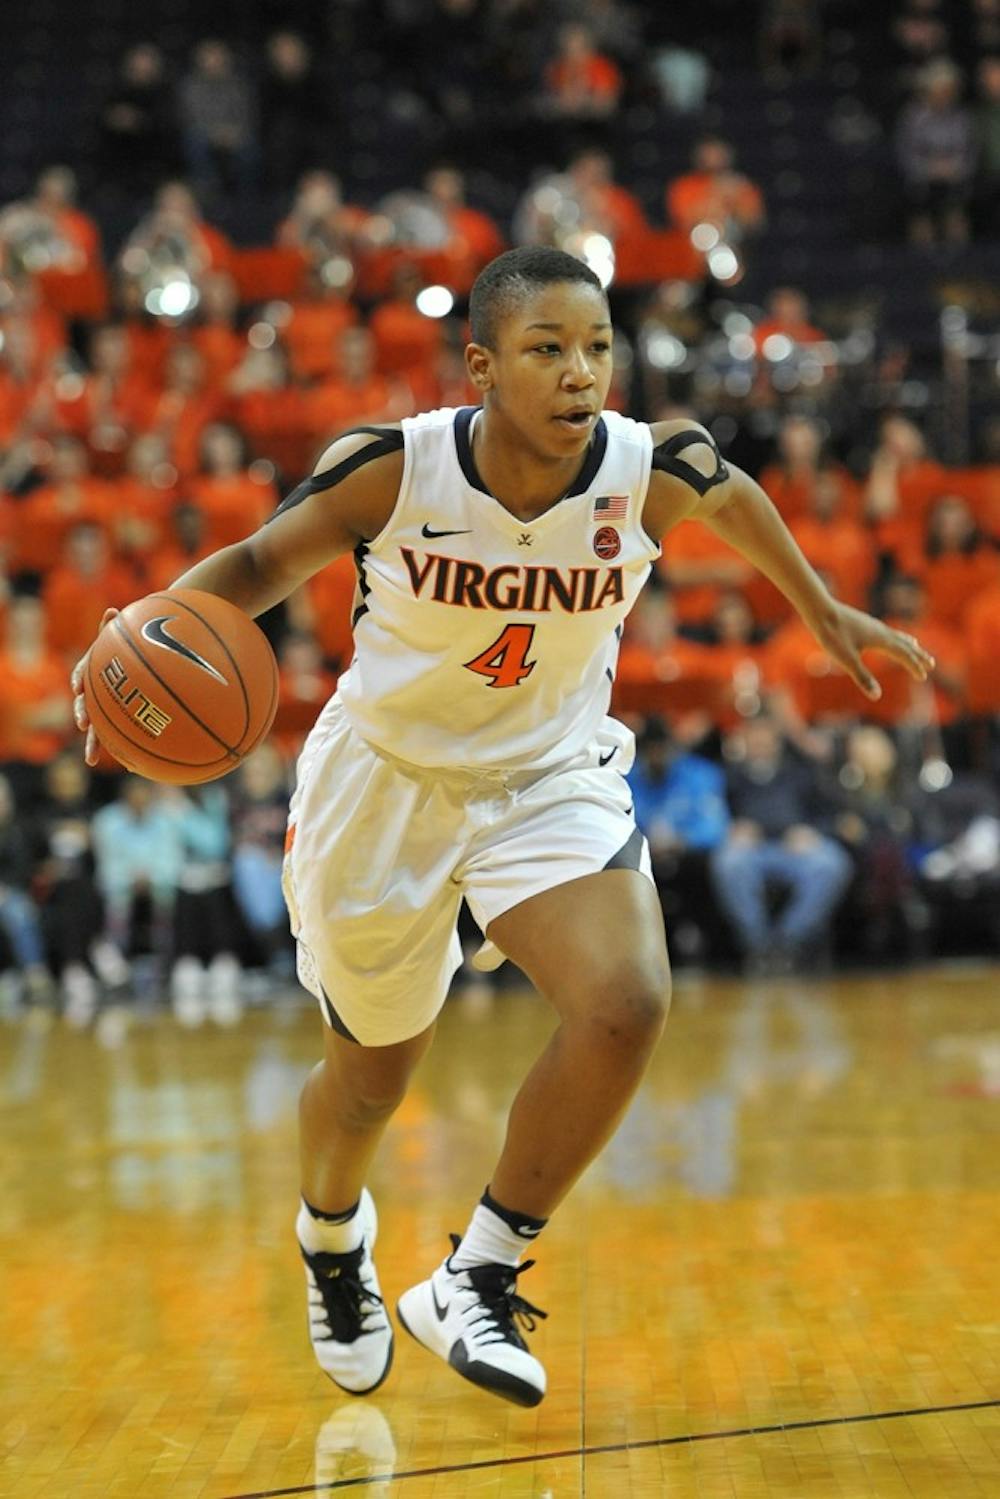 <p>Virginia sophomore guard Dominique Toussaint will try to help her team overcome No. 7 Mississippi State Friday to open the Cavaliers' season.</p>